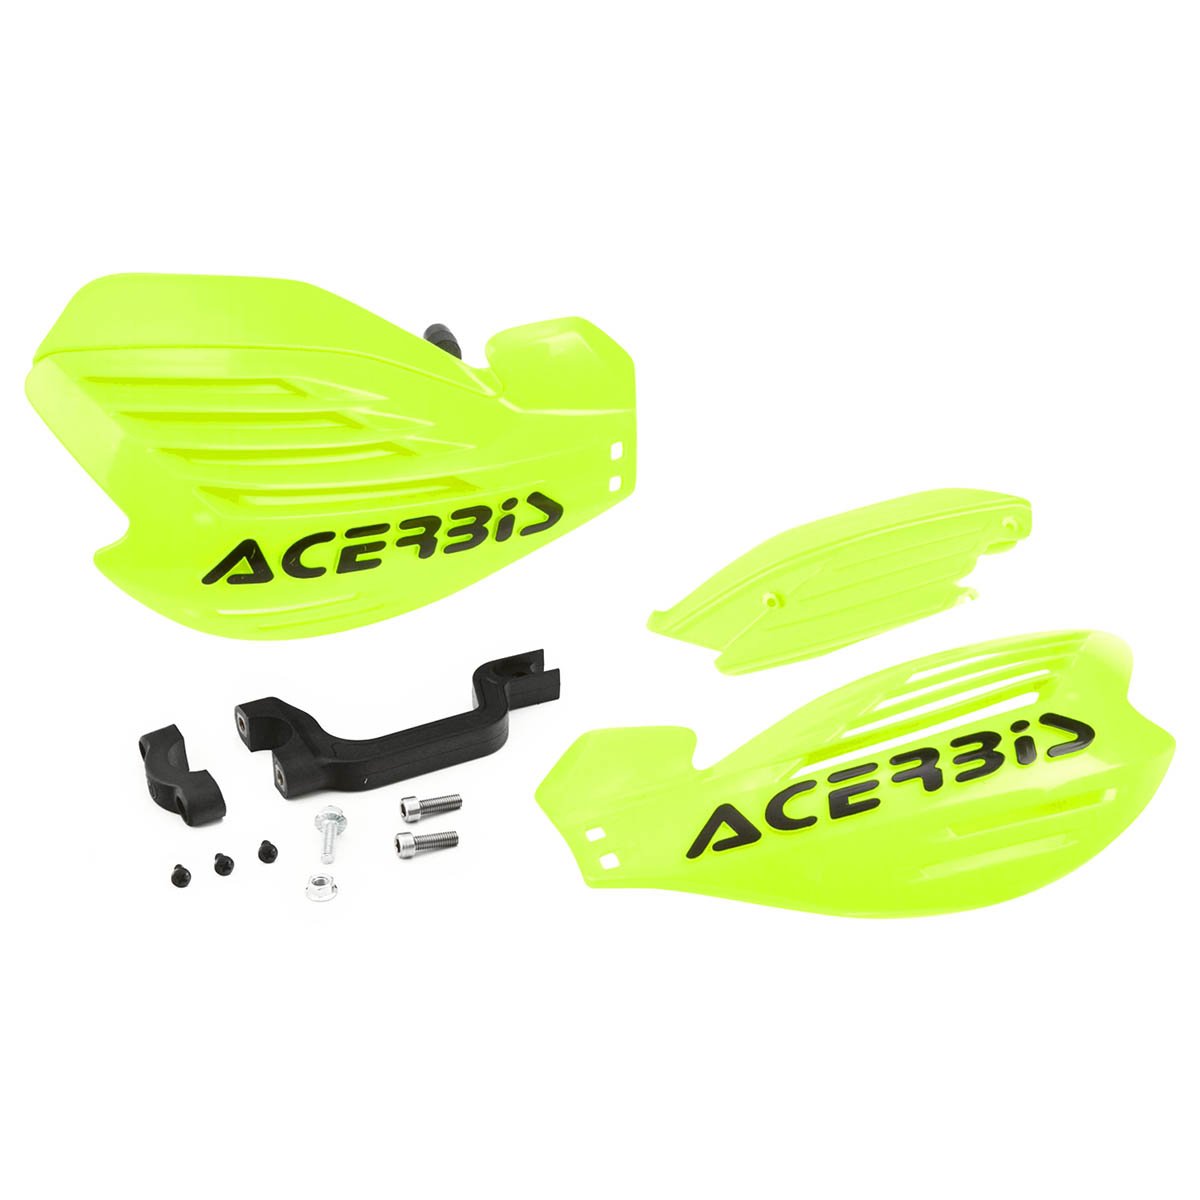 UFO Universal Handguards for Motocross with fixing kit Flourescent Fluo Yellow 